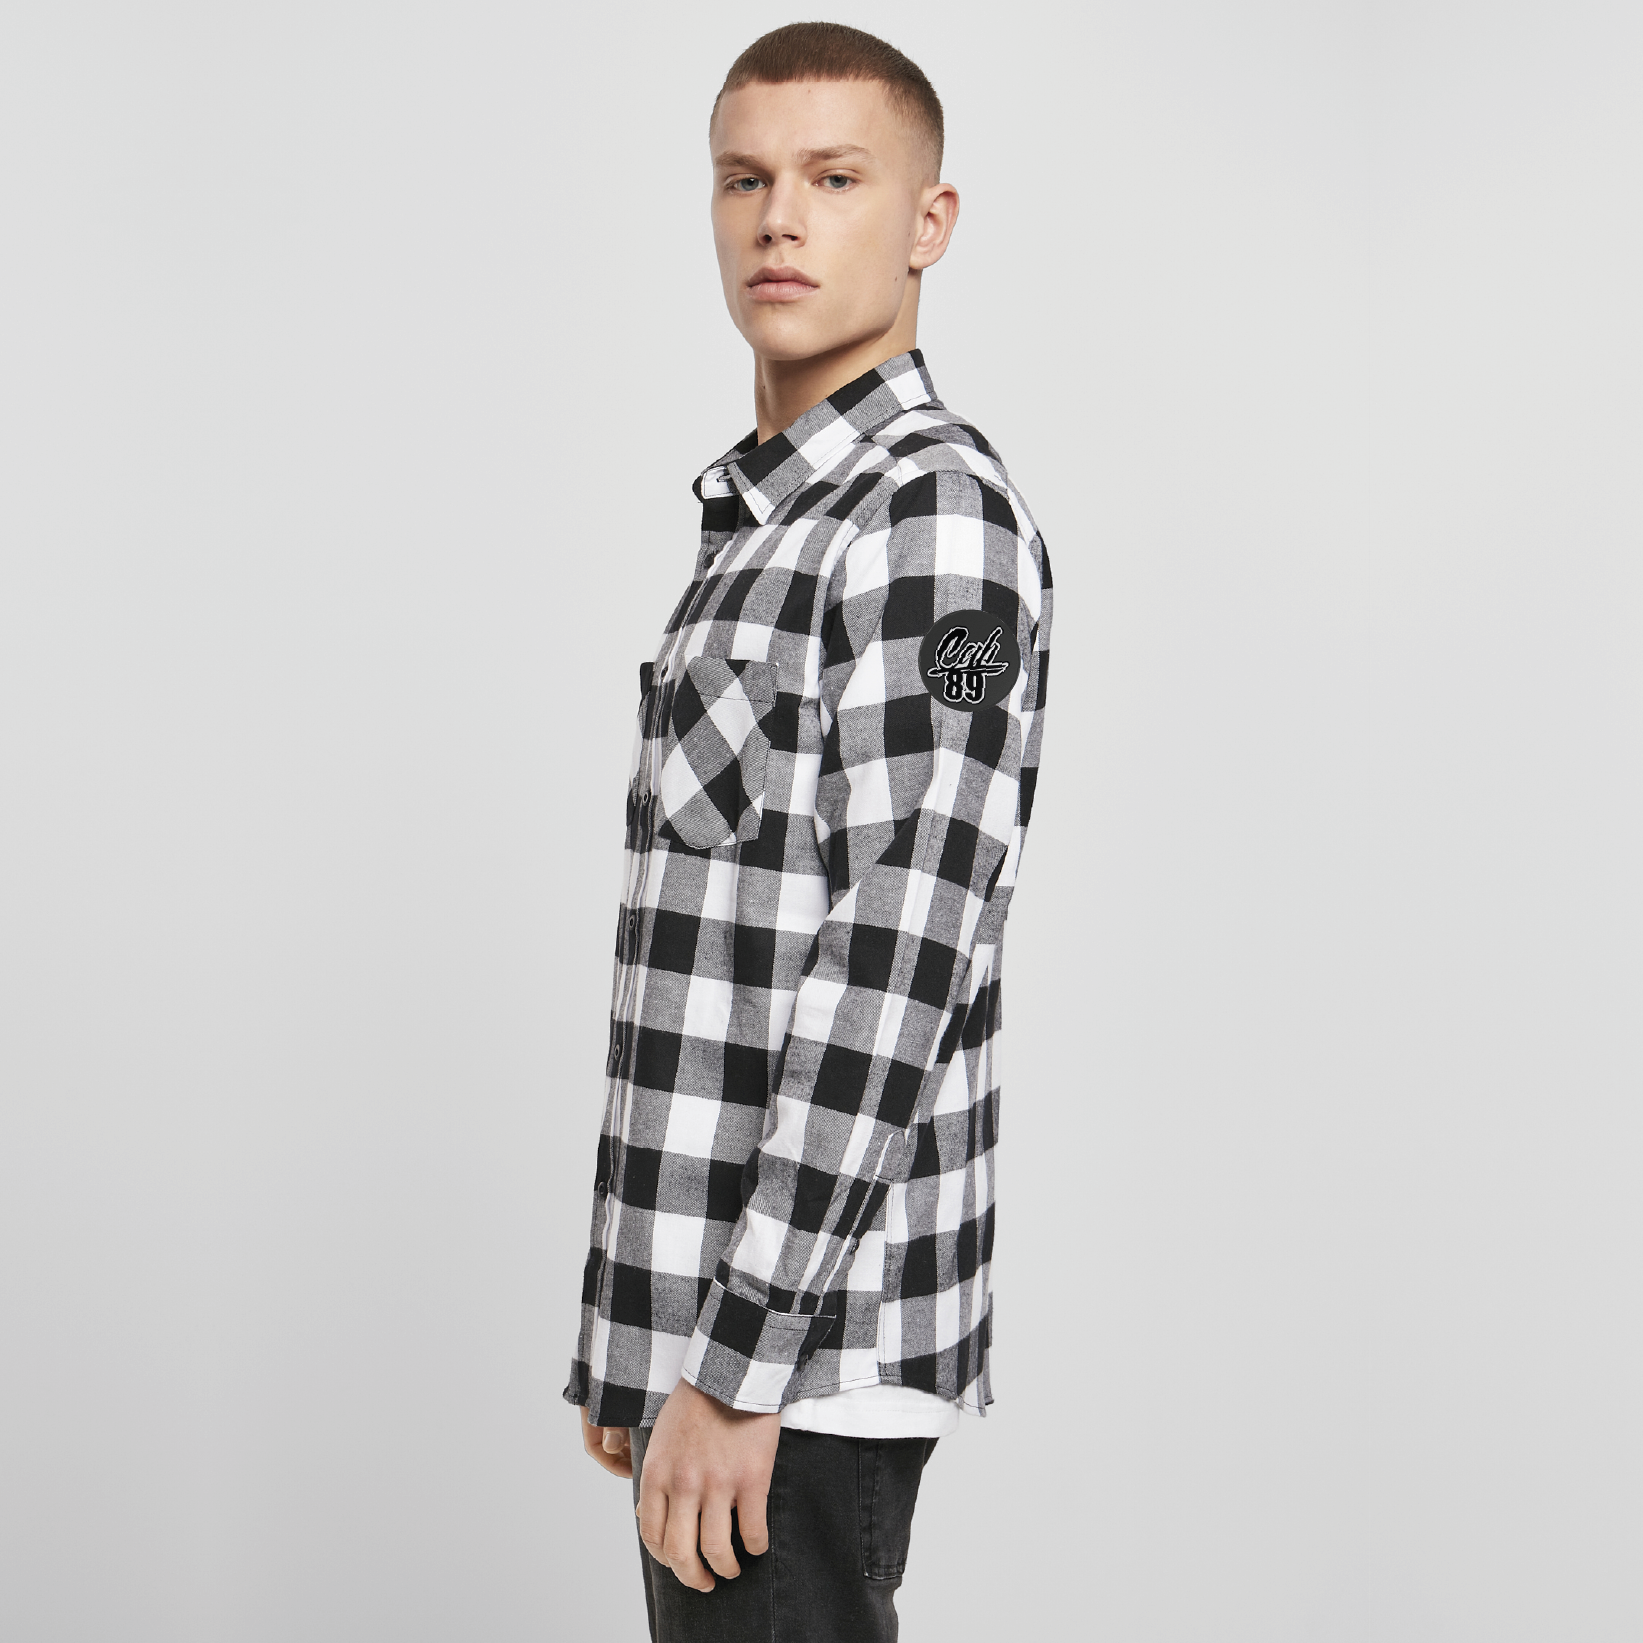 Cab89 Checked Flanell Shirt